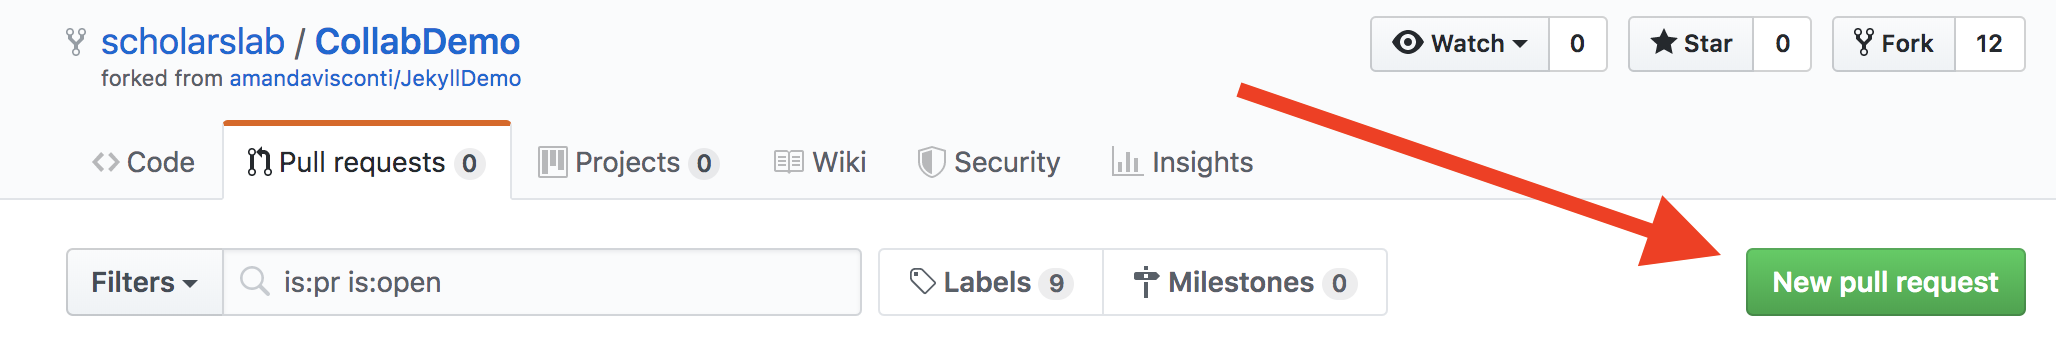 Screenshot of the 'New pull request' button